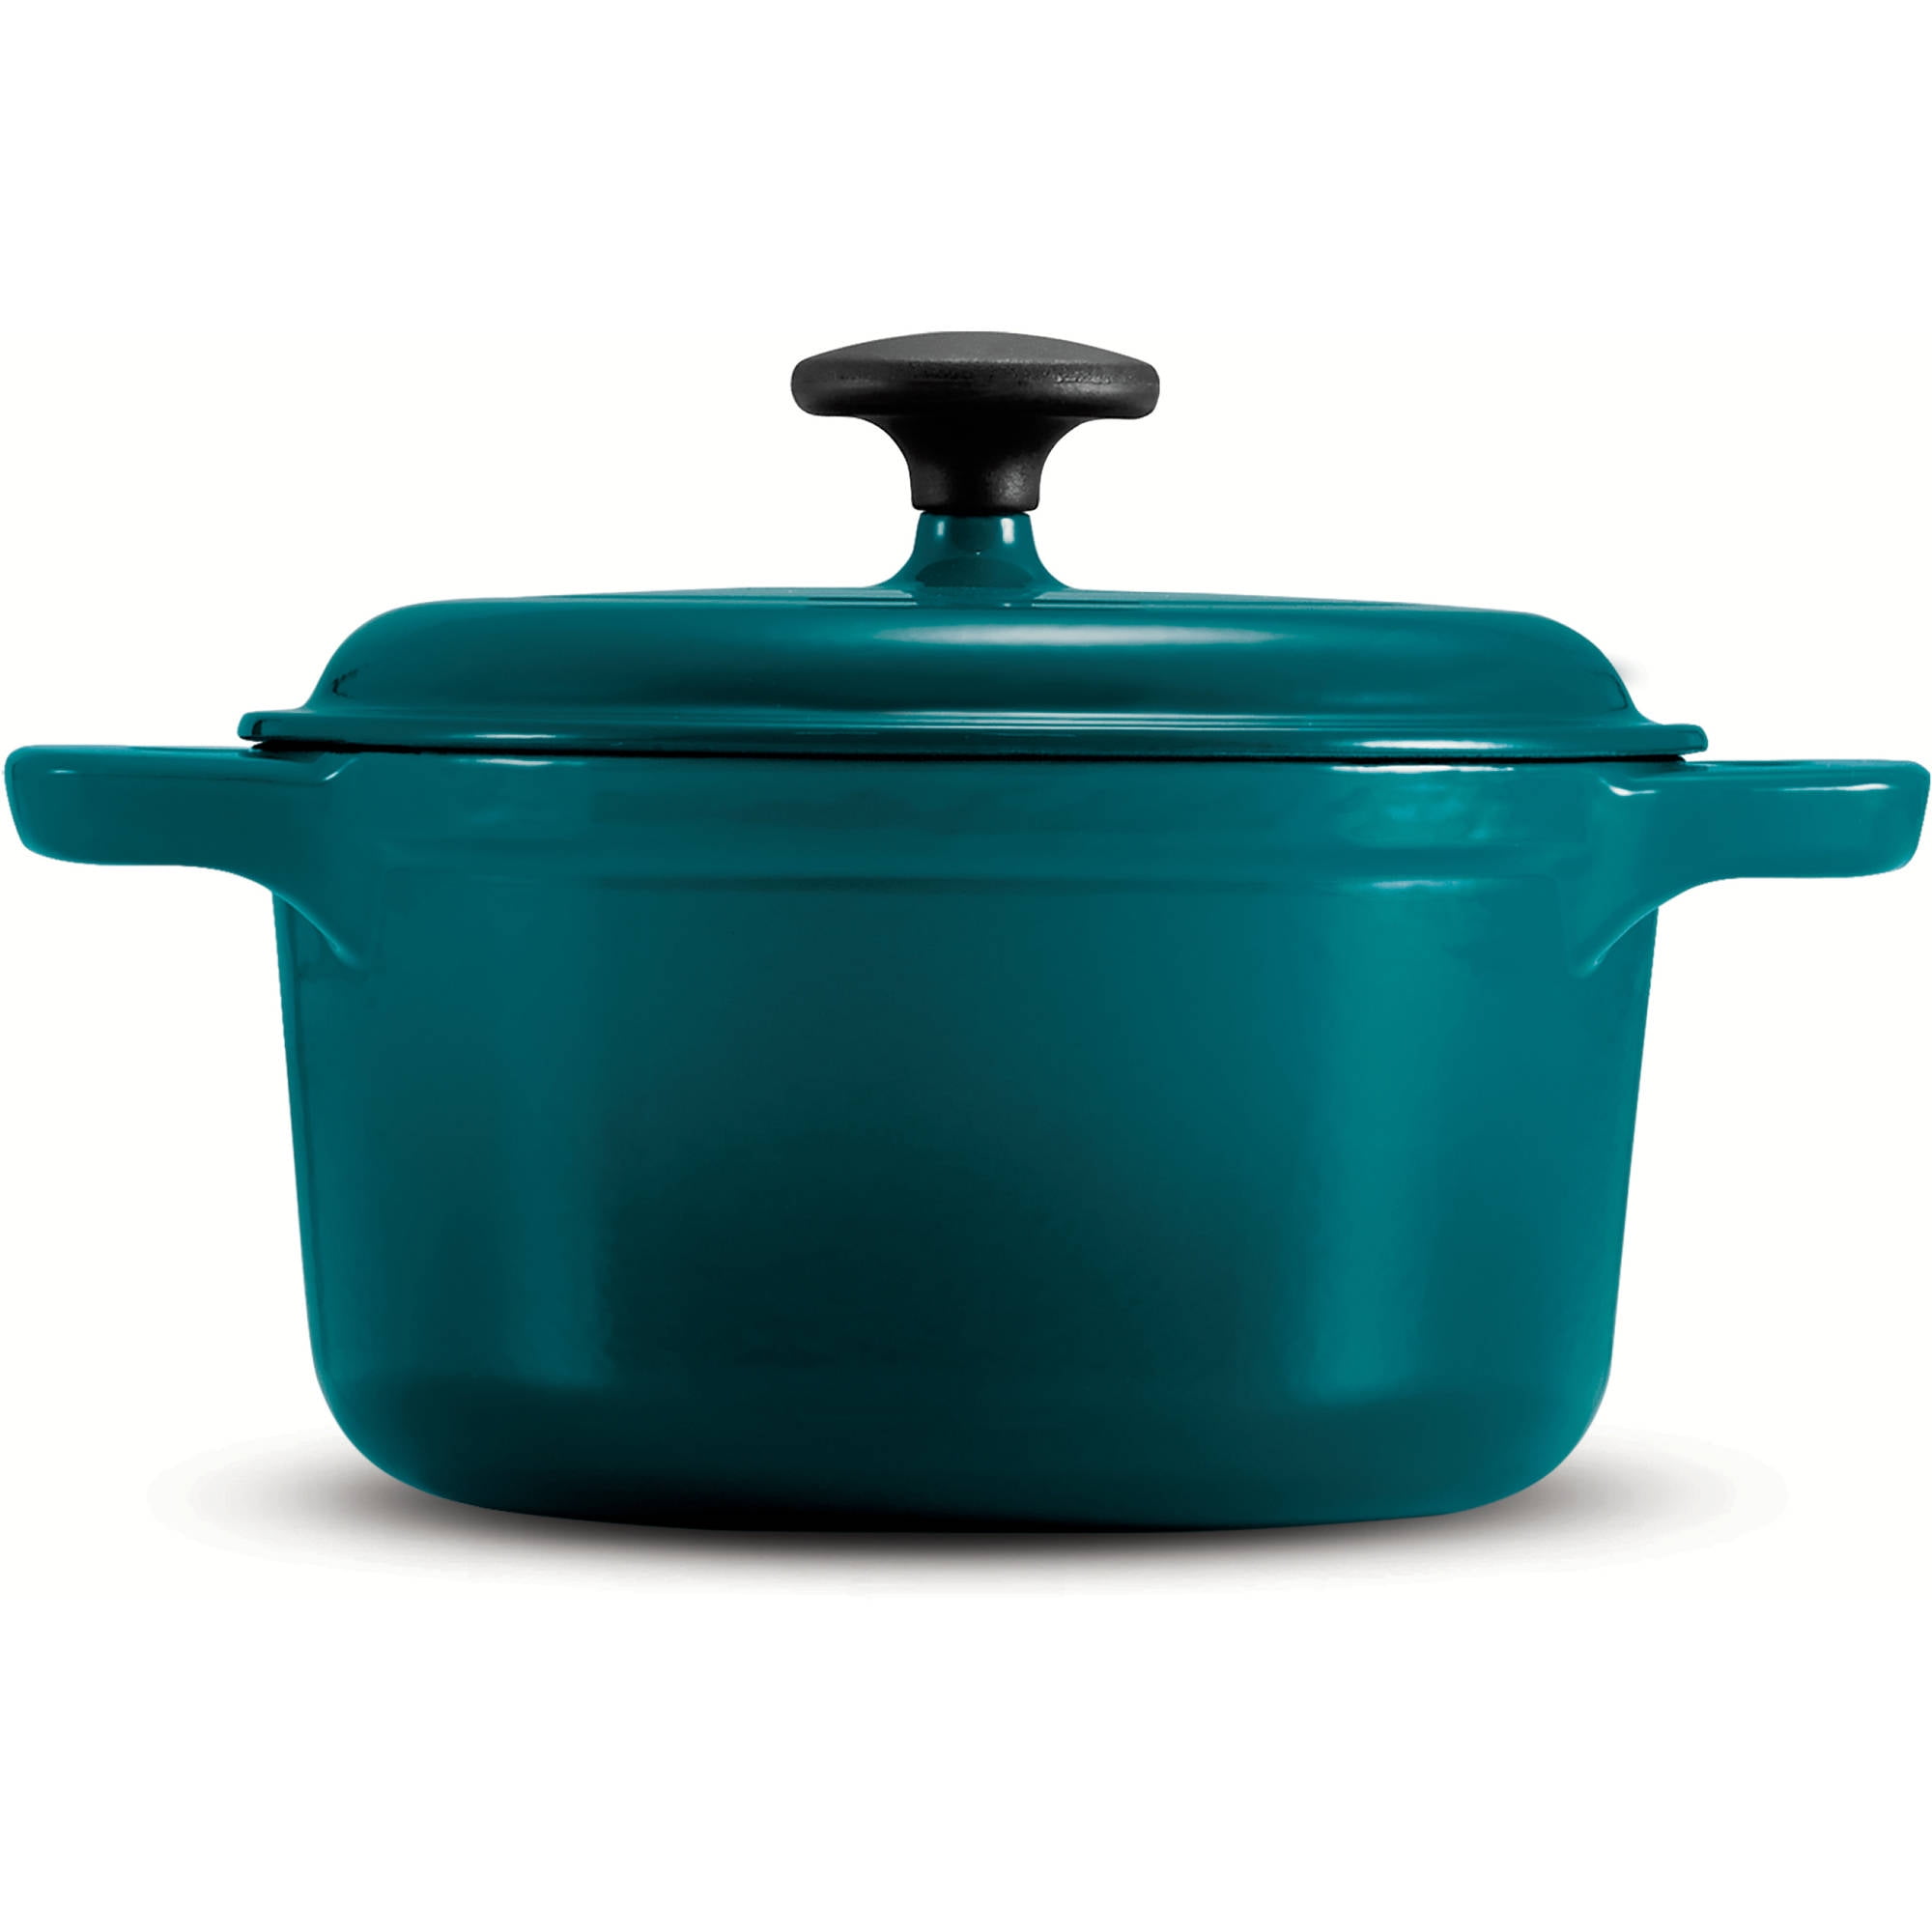 Tramontina Dutch Oven Cookware Review - Consumer Reports